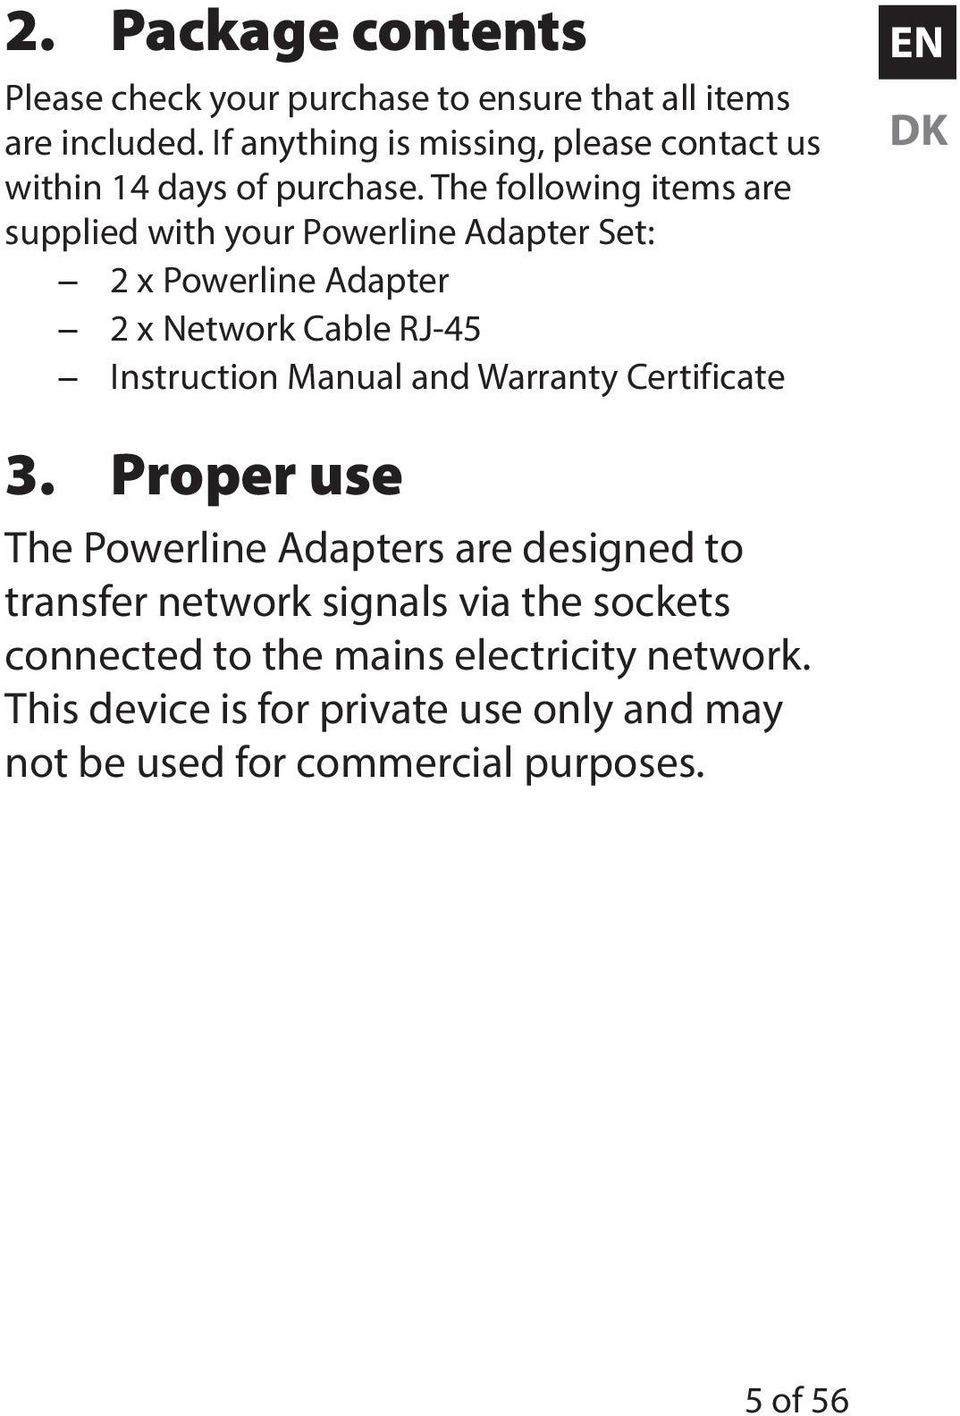 The following items are supplied with your Powerline Adapter Set: 2 x Powerline Adapter 2 x Network Cable RJ-45 Instruction Manual and